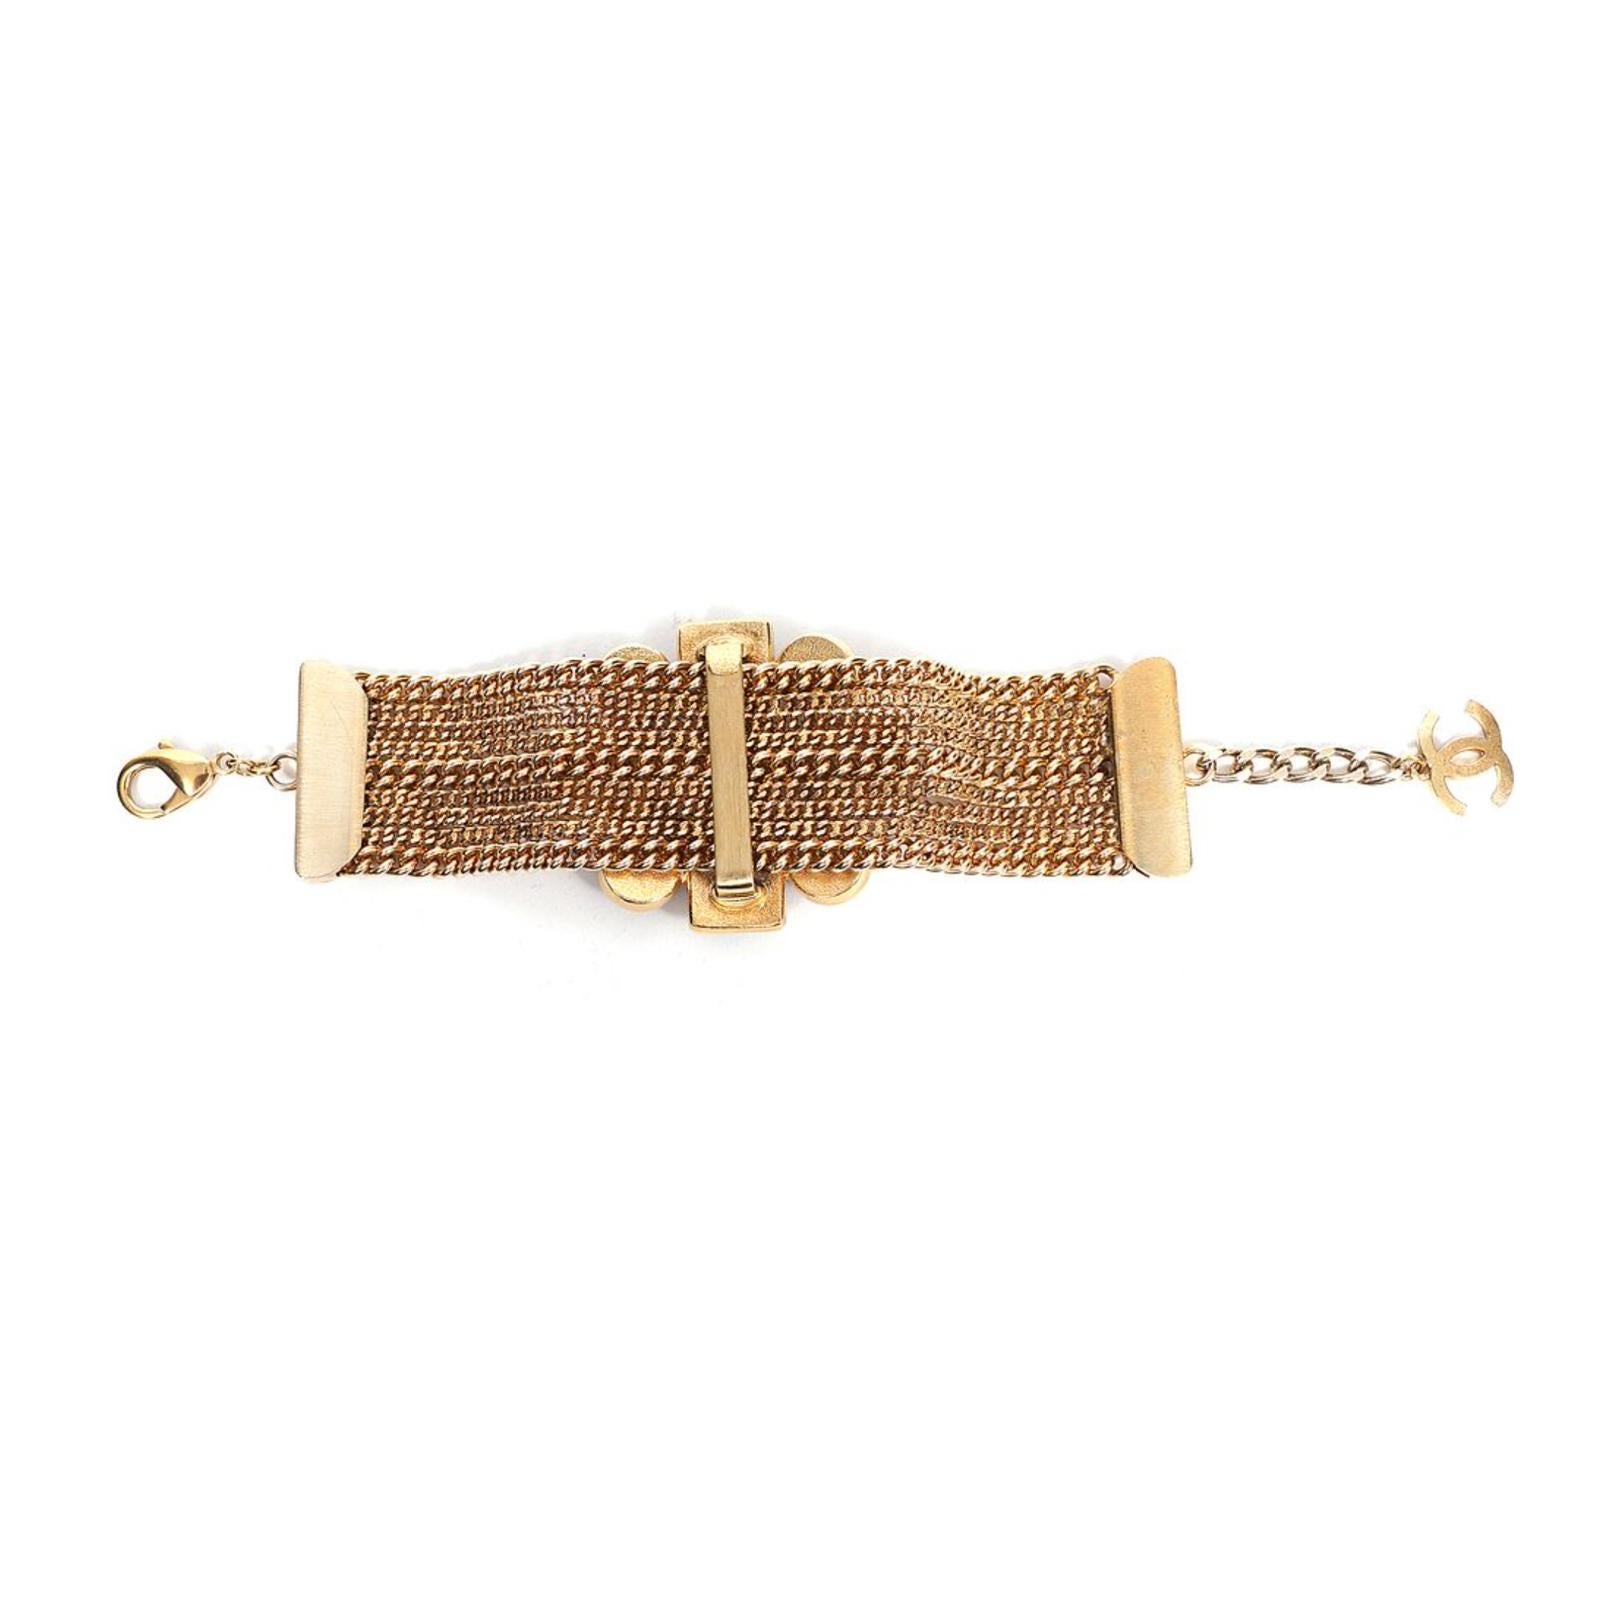 This bold multi-strand beaded cuff features a bold poured glass detailing with gold hardware and small crystal bead accents. Featuring a cloister clamp on one end and a Chanel CC logo on the other.

COLOR: Gold, black
MATERIAL: Metal, crystal
ITEM